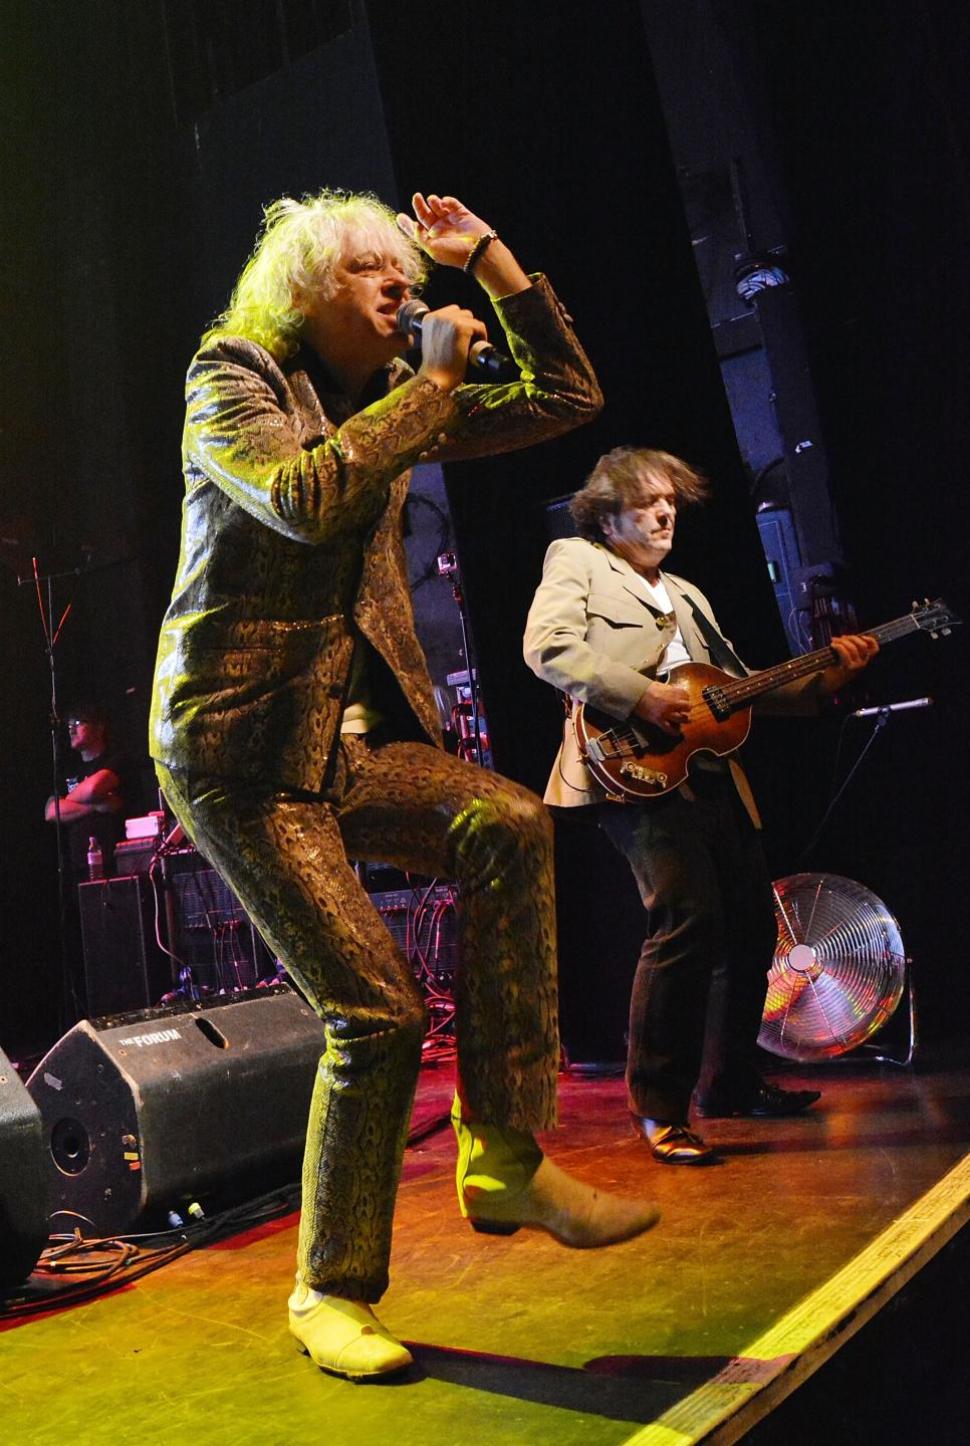 Sir Bob Geldof and Pete Briquette of The Boomtown Rats perform live on stage at The Kentish Town Forum on Nov. 7 in London, United Kingdom. Geldof has recruited a new set of singers for the 2014 version of ‘Do They Know It’s Christmas?’ to help combat Ebola.